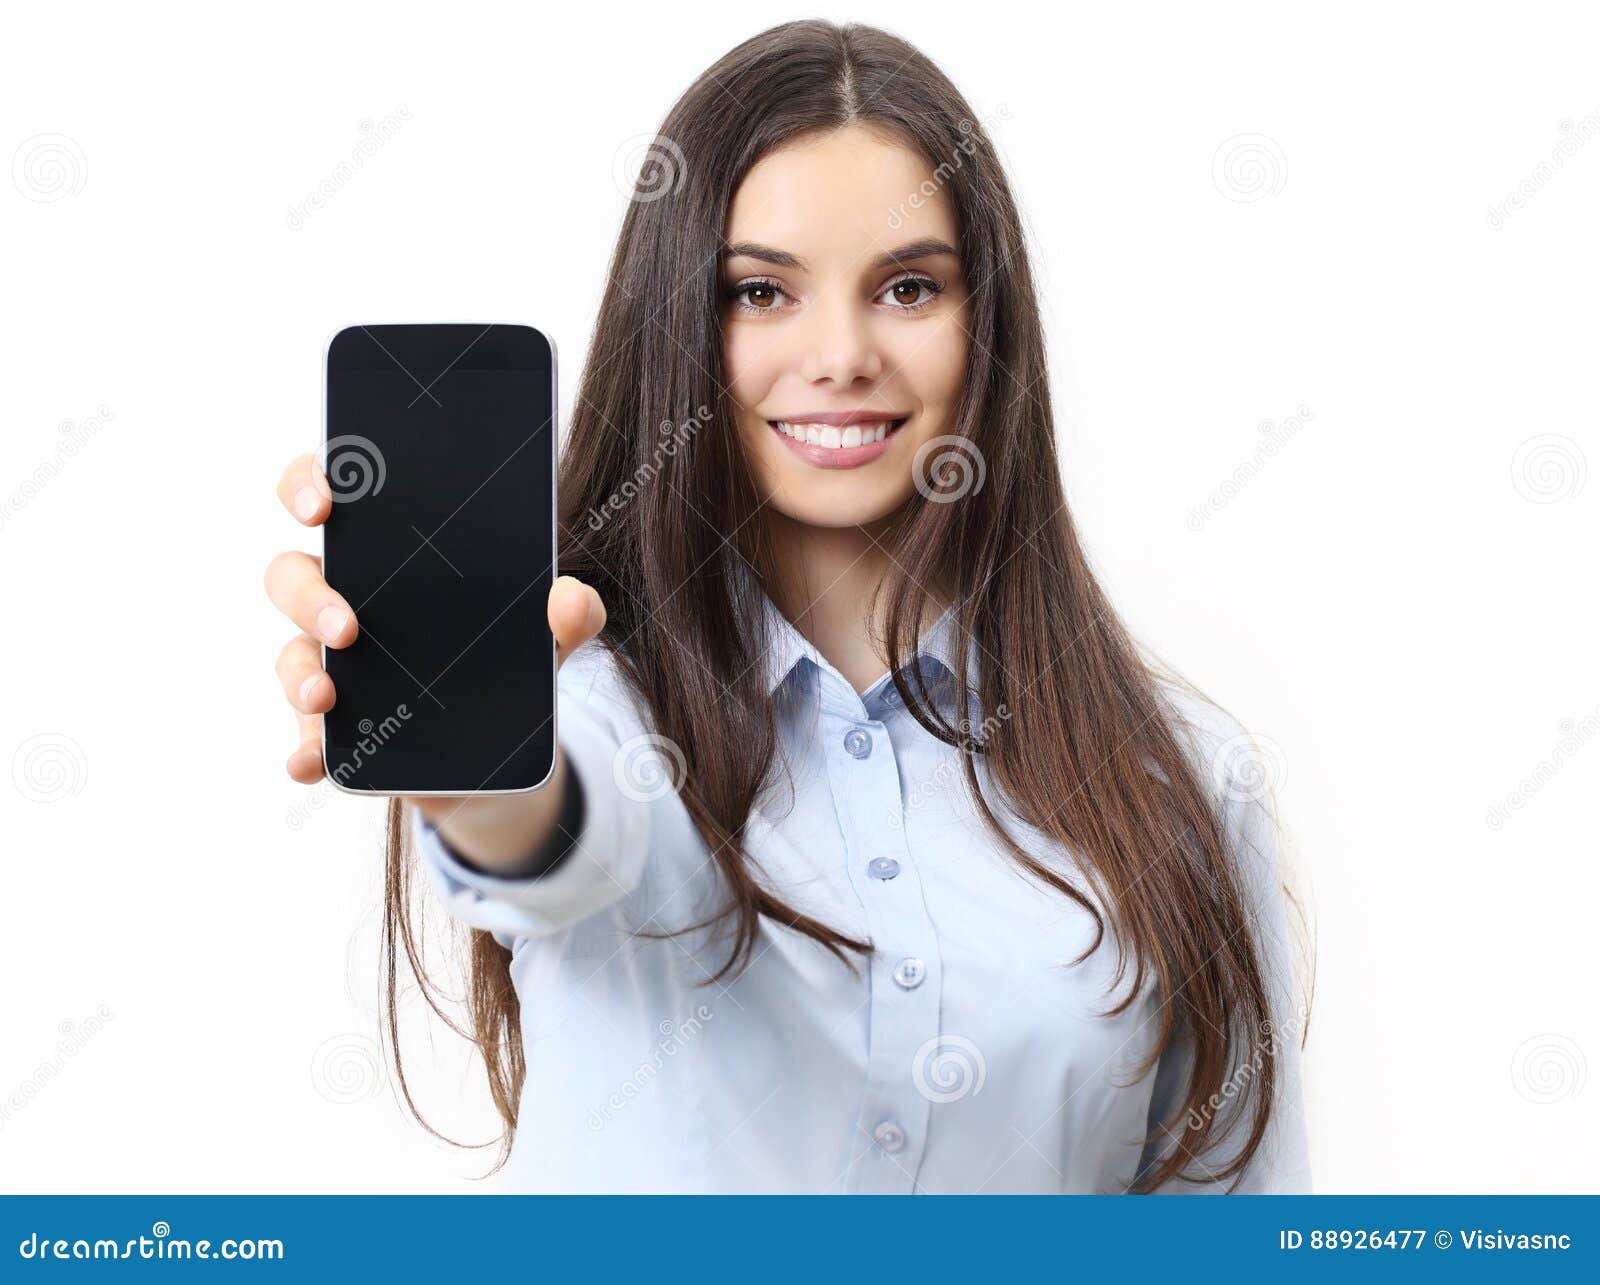 happy smiling woman showing mobile phone  in white